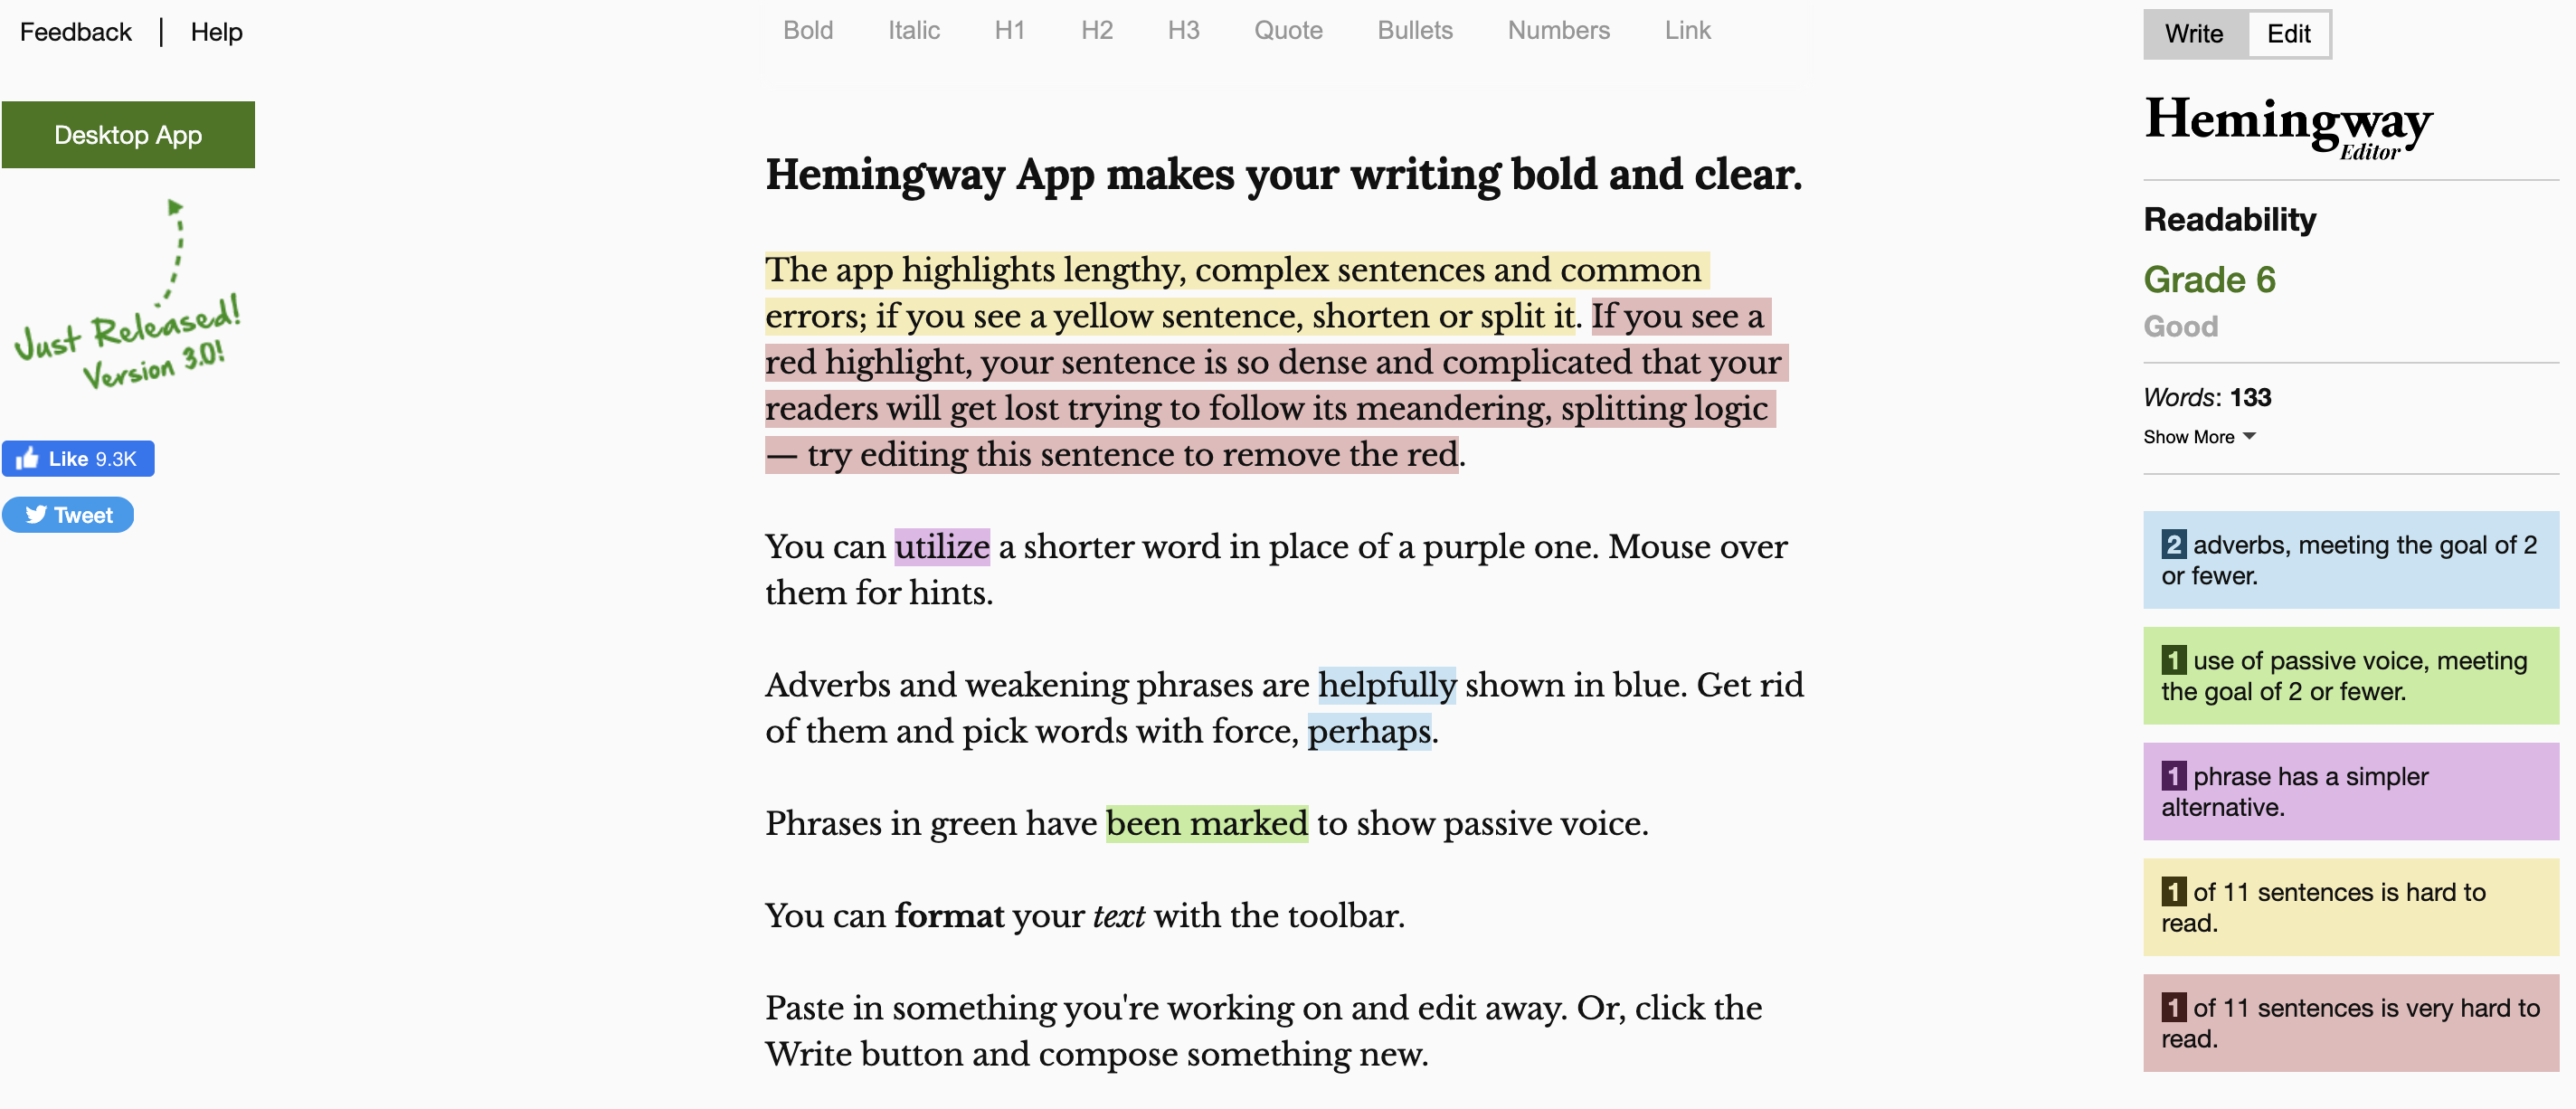 screenshot of hemingway app, an seo content tool to help with voice and style